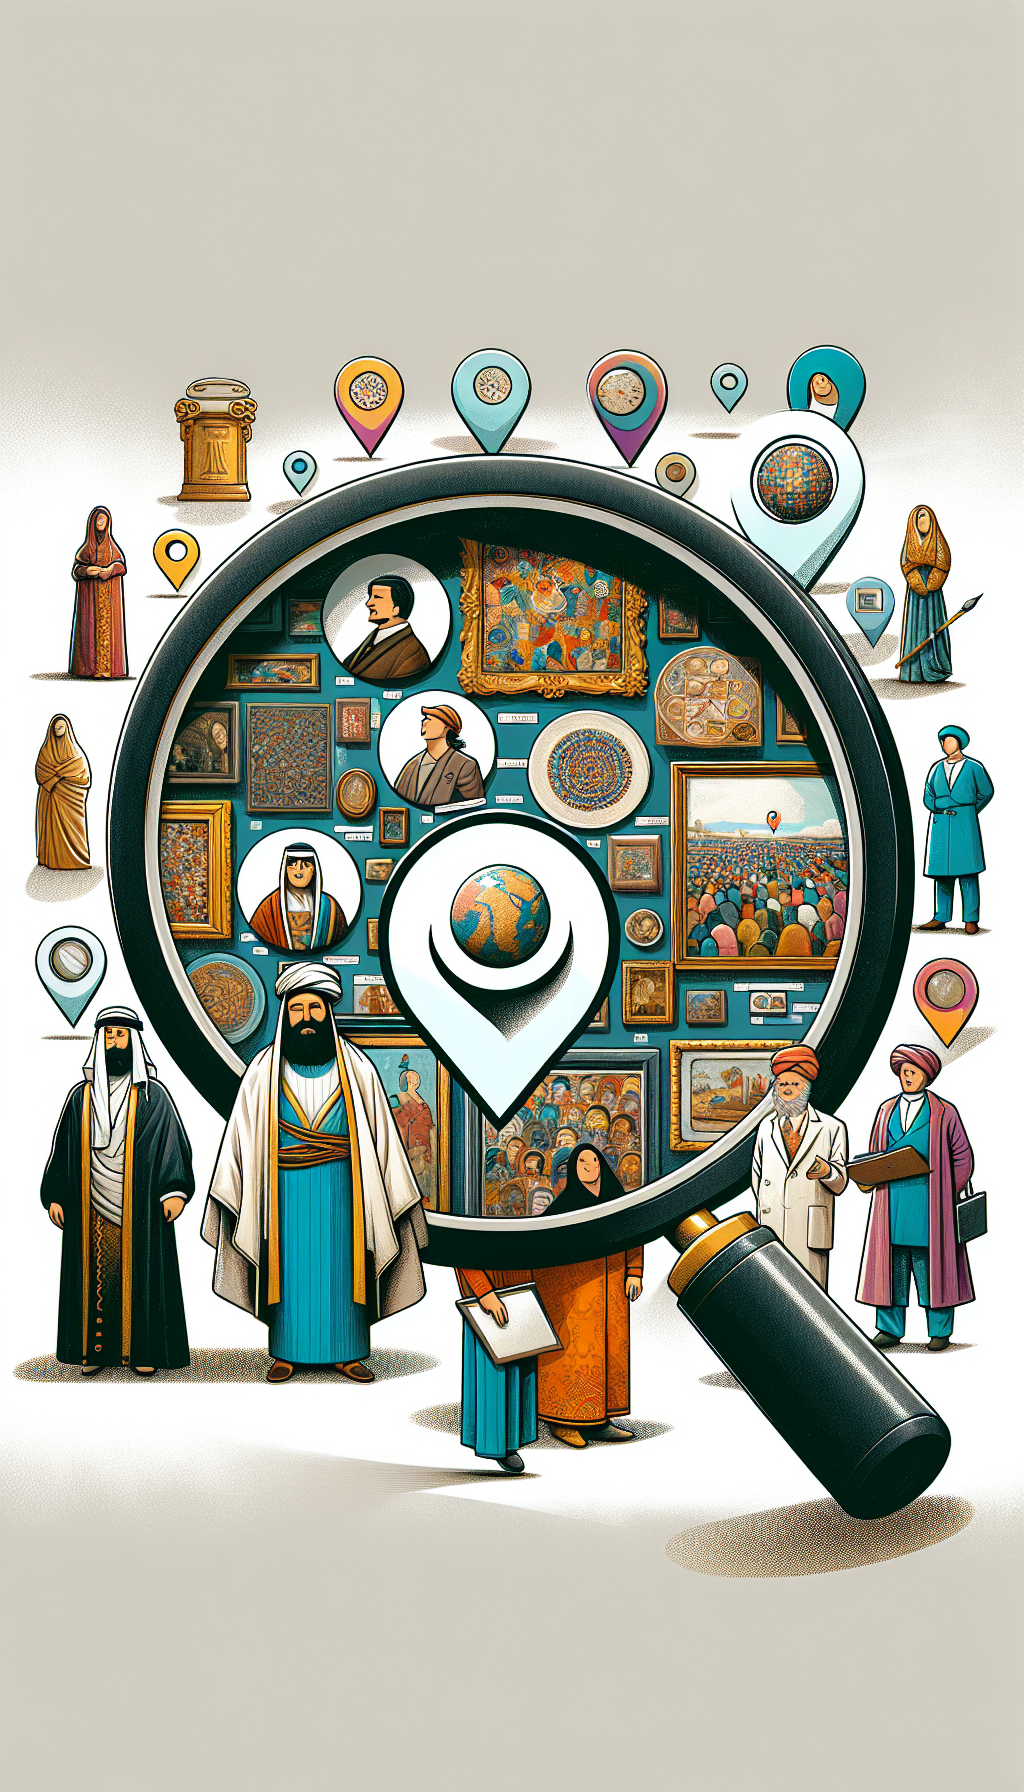 An illustration featuring a magnifying glass hovering over a vibrant patchwork of paintings and sculptures, with diverse, miniature expert figures examining them. Each expert wears traditional attire from different regions, emphasizing their global expertise, while a location pin above the artwork anchors the 'near me' concept. The image employs an eclectic mix of styles, from impressionist to modern, symbolizing the diversity of art appraised.